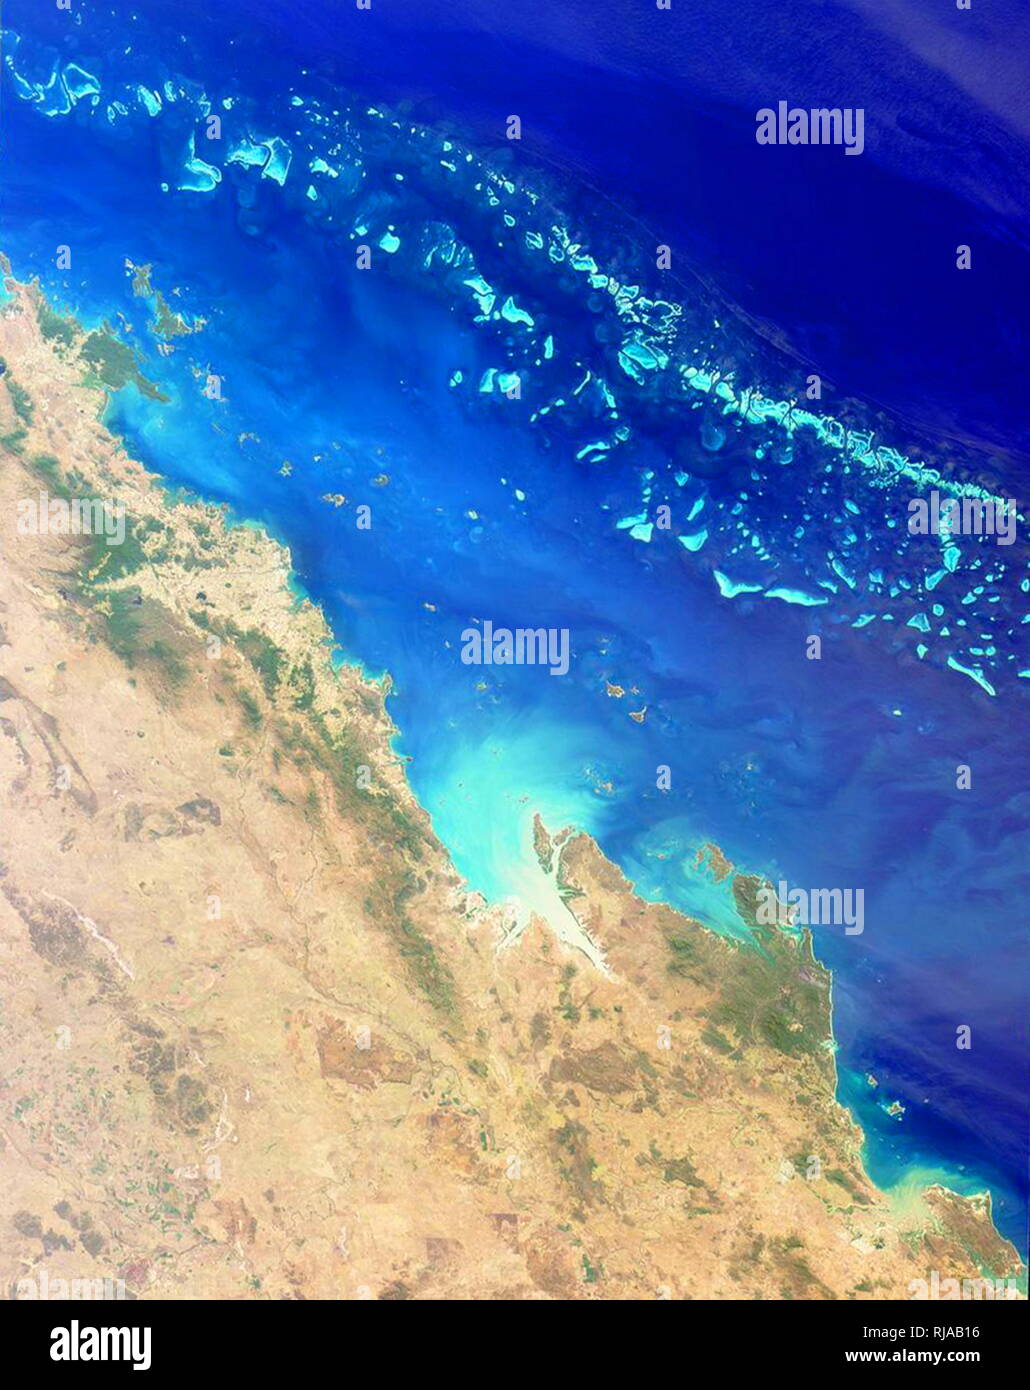 The Great Barrier Reef viewed from earth orbit in 2001. The reef extends for 2,000 kilometres along the north-eastern coast of Australia. It is not a single reef, but a vast maze of reefs, passages, and coral cays (islands that are part of the reef). photographed from the Terra Spacecraft, Multi-angle Imaging Spectroradiometer (MISR) Stock Photo